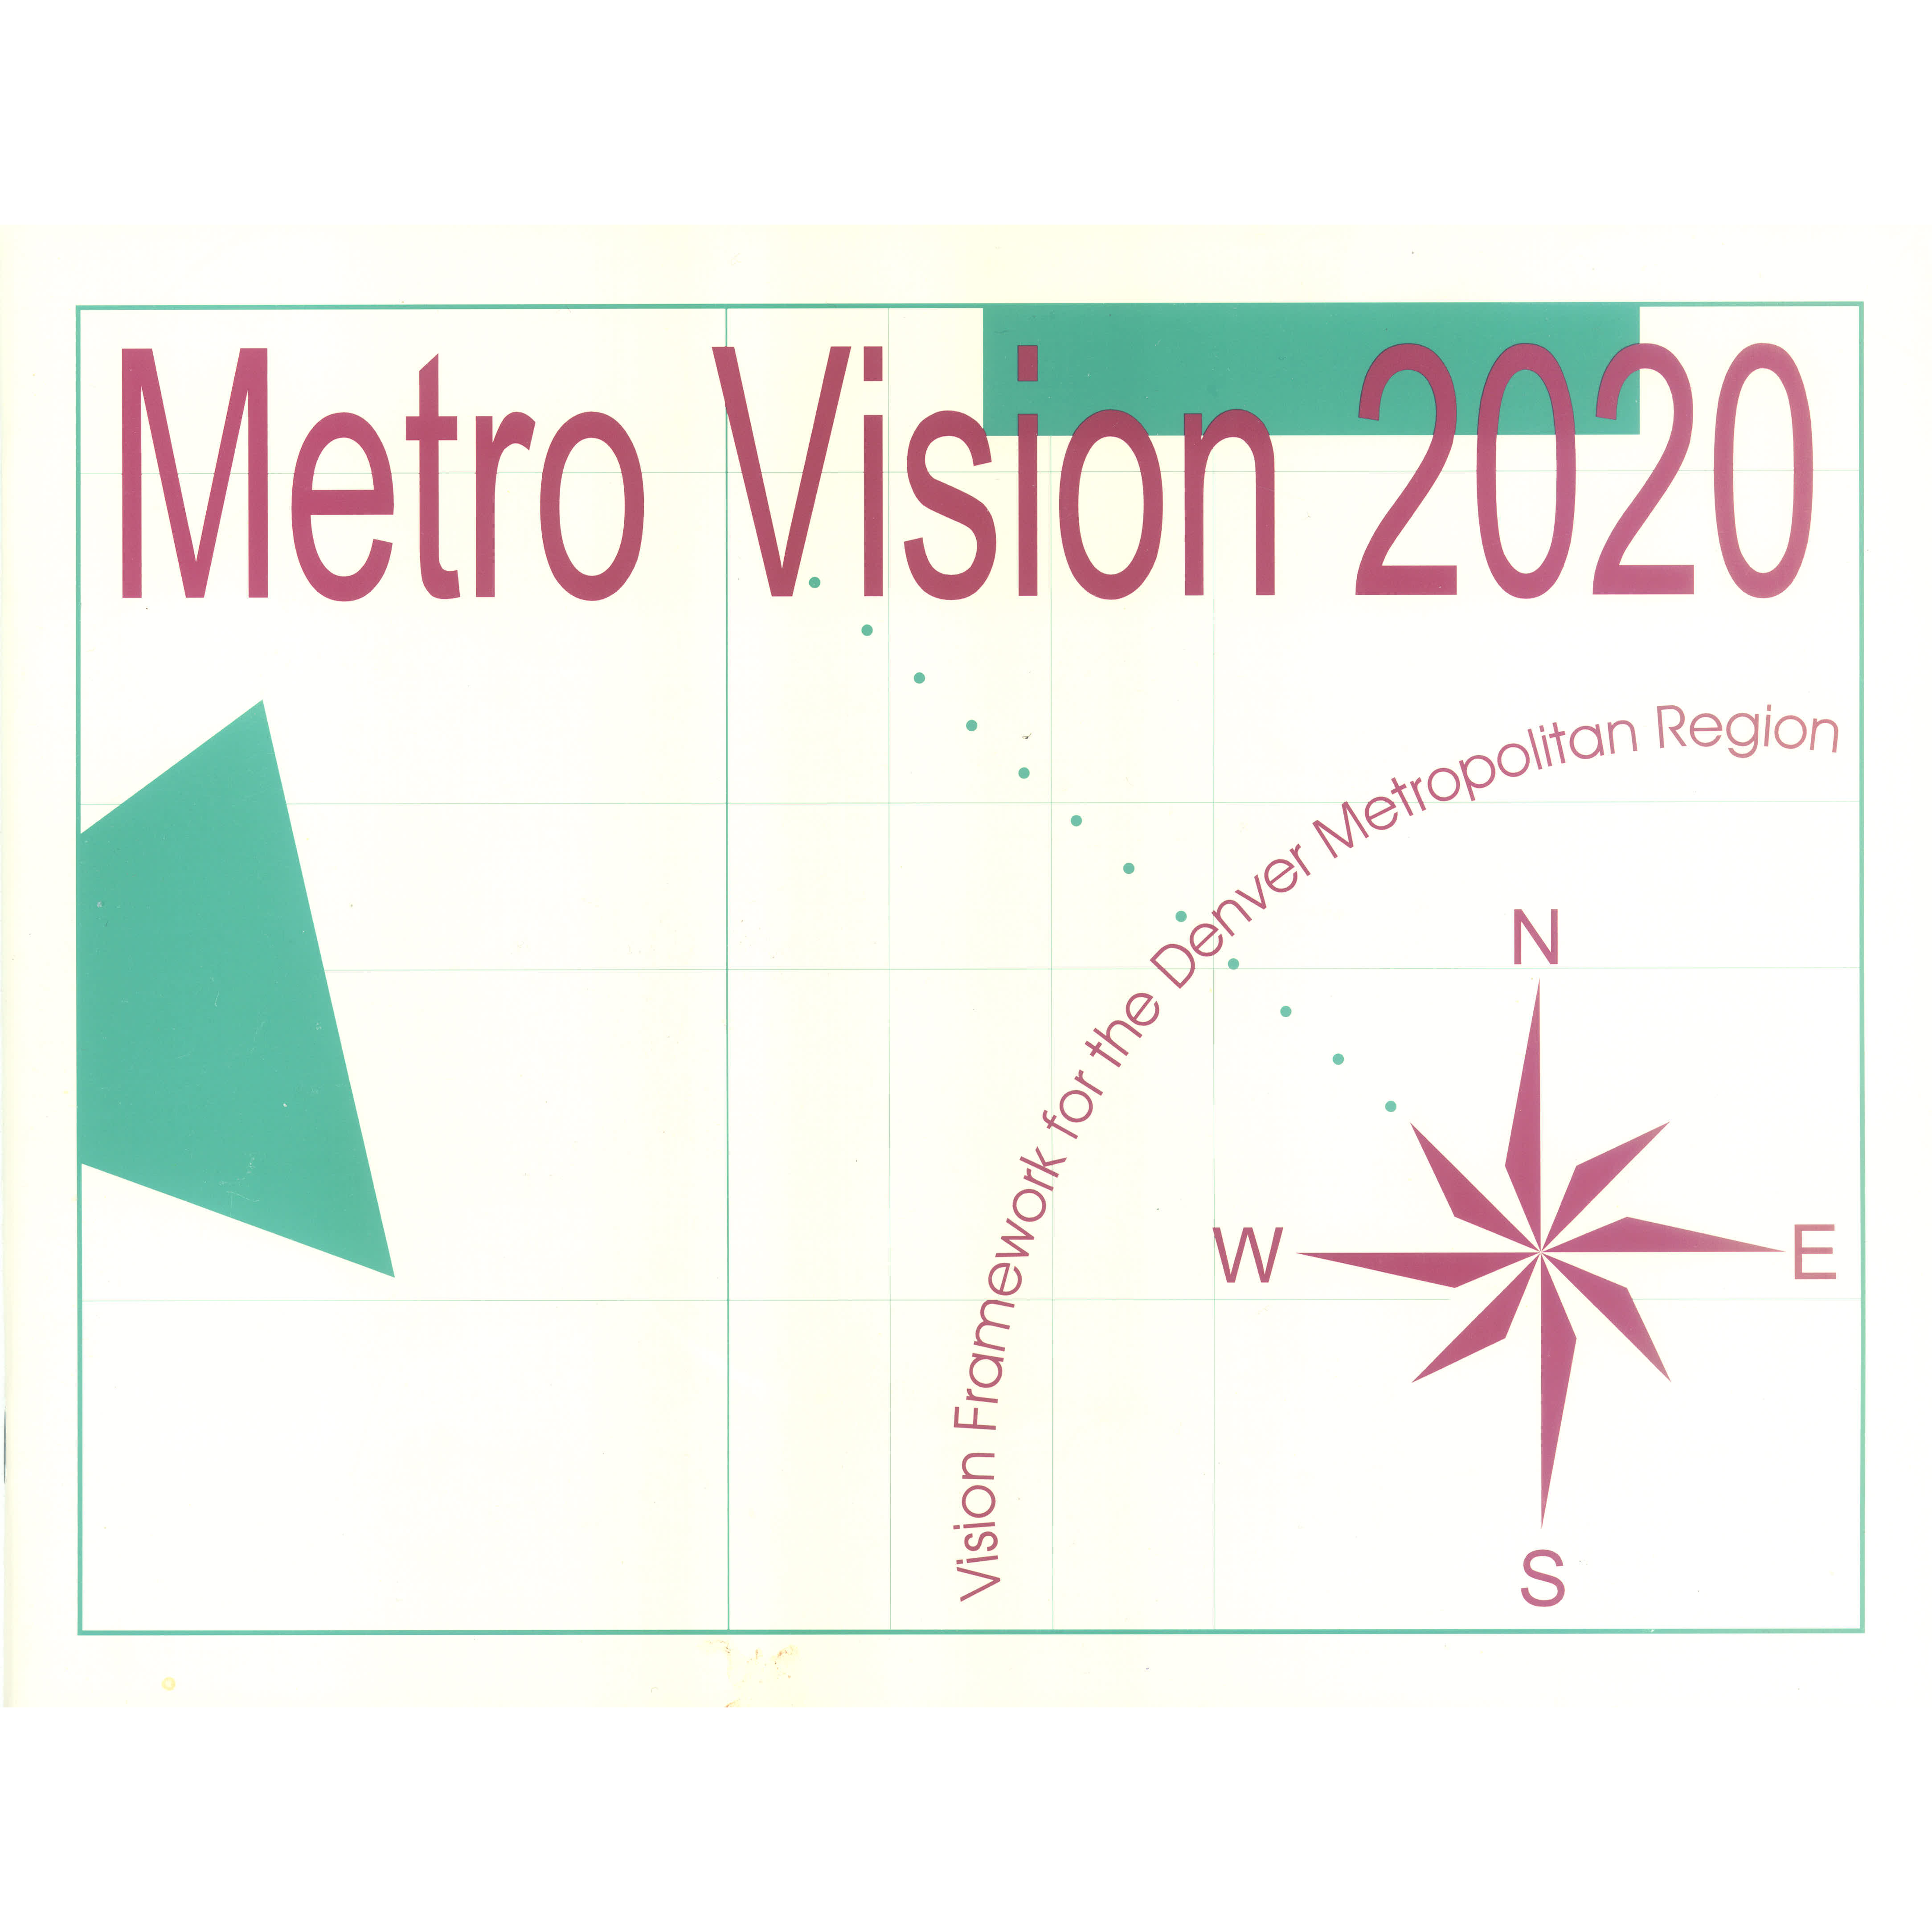 A report cover with a stylized compass rose and the words Metro Vision 2020 Vision framework for the Denver Metropolitan Region